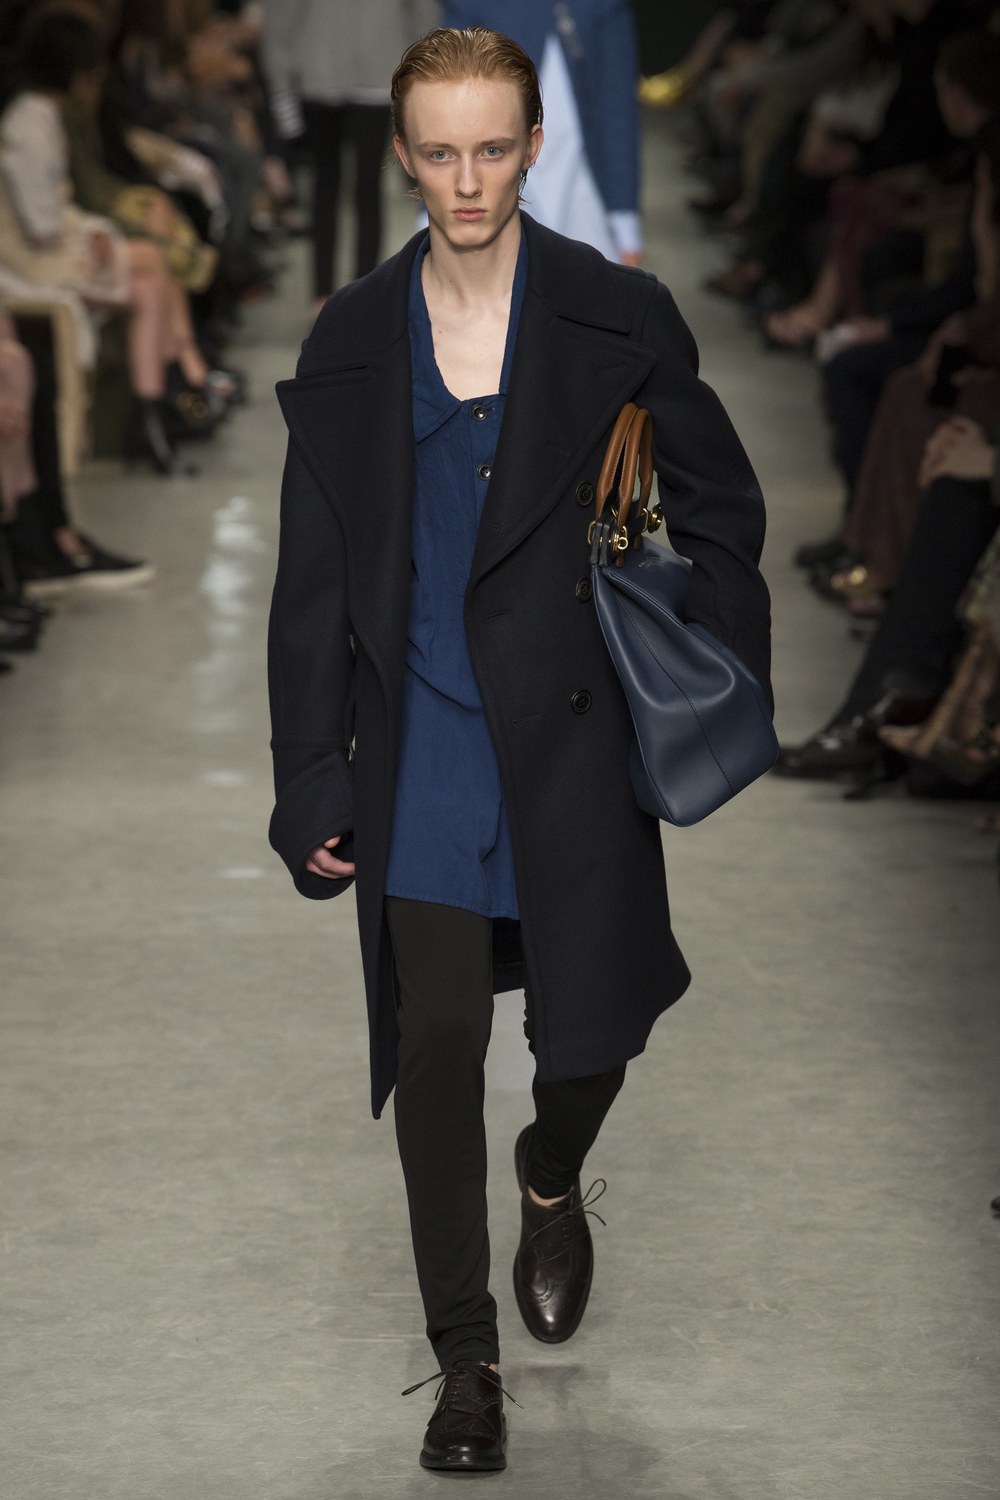 From Asymmetry to Deconstruction: What We Think of Burberry’s February ...